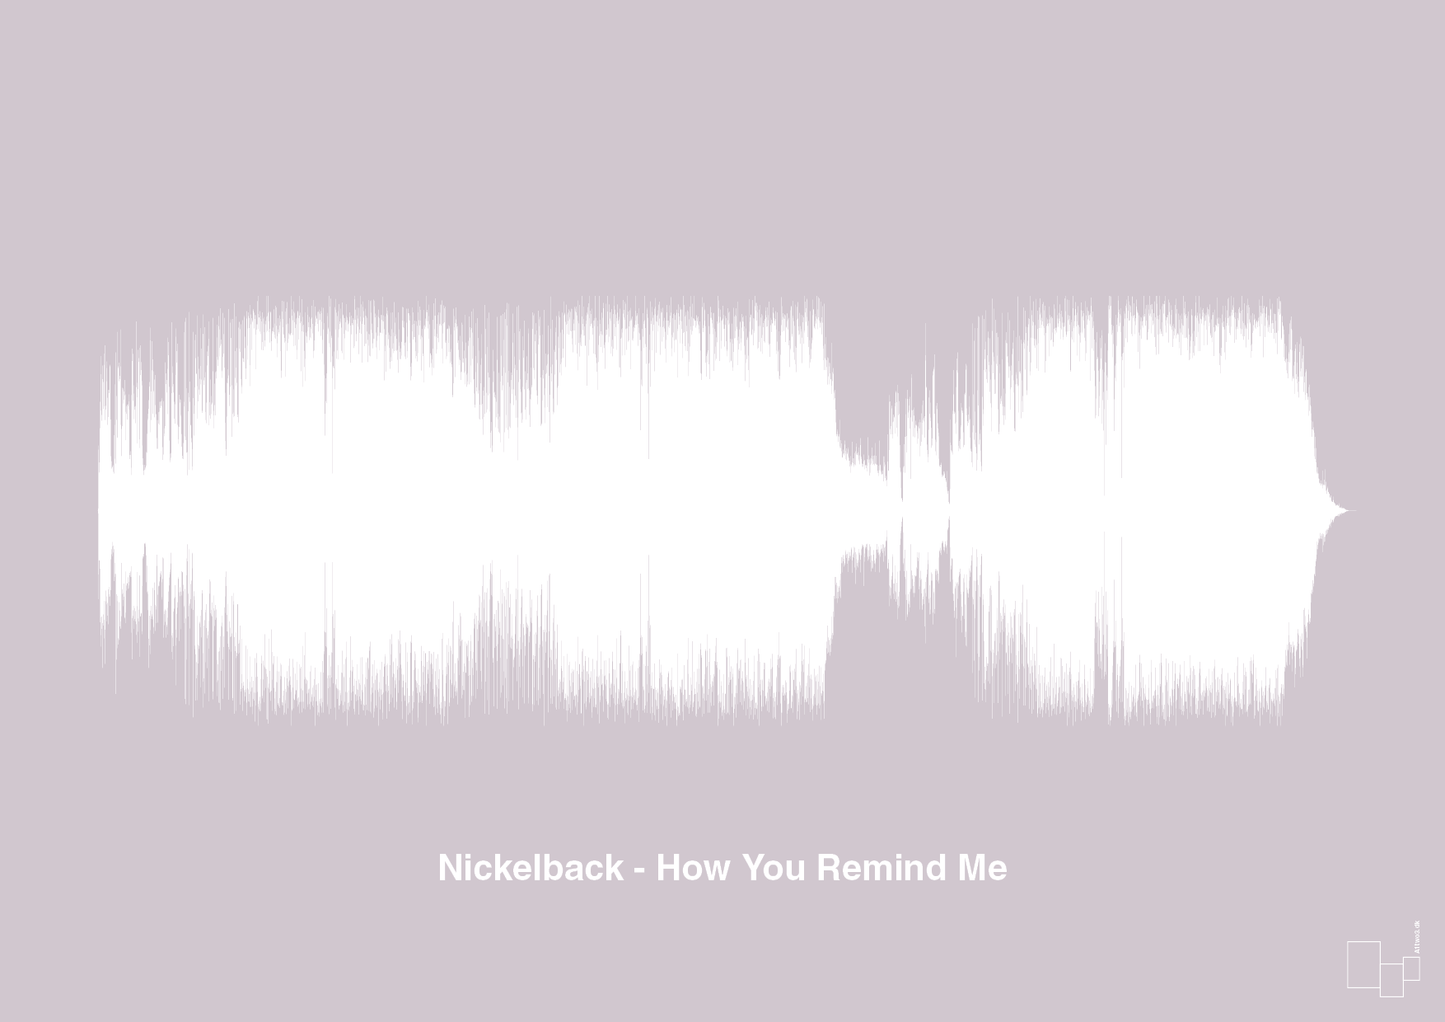 nickelback - how you remind me - Plakat med Musik i Dusty Lilac